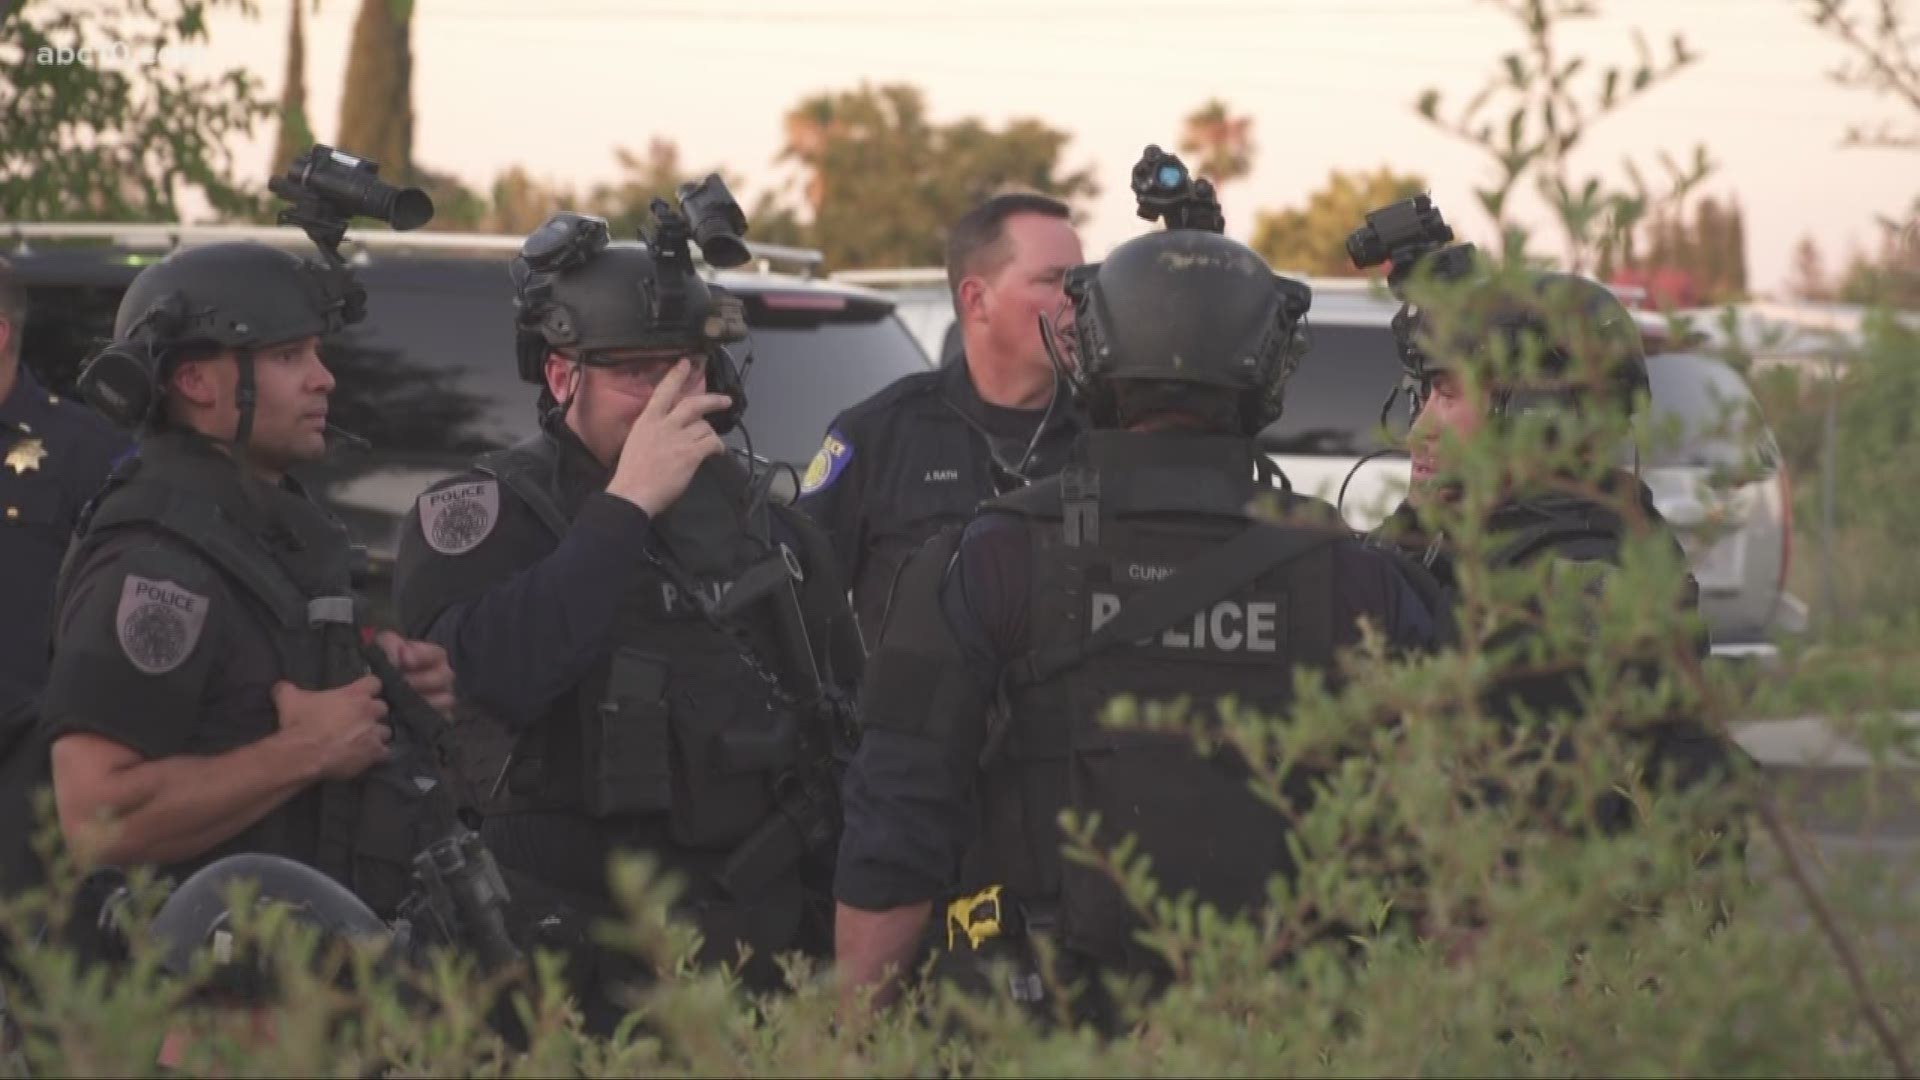 Residents in a South Sacramento neighborhood were told to shelter in place as police searched for an armed bank robbery suspect, Monday night.